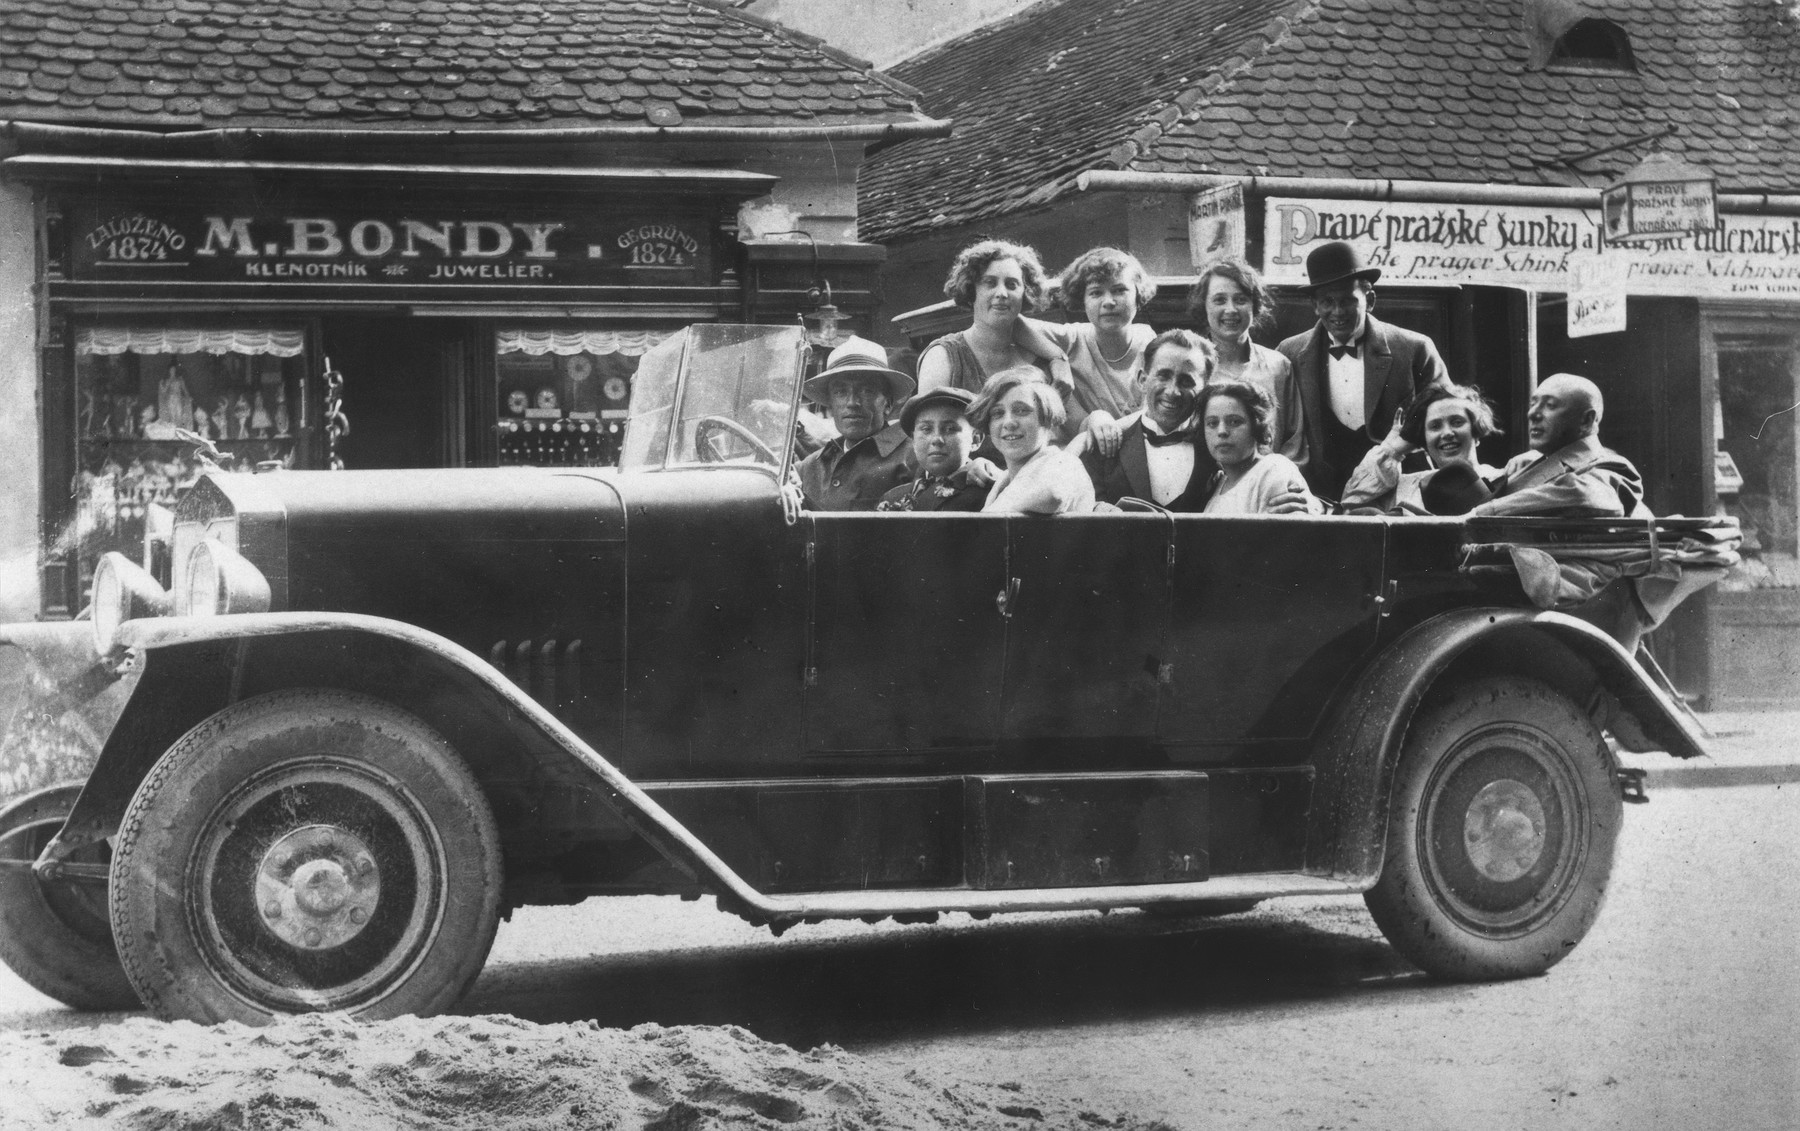 The Beck family goes for a ride in a large automobile.

Among those pictured are Margit, Erwin, Olga, Bela, Fredericka and Ilona Beck.